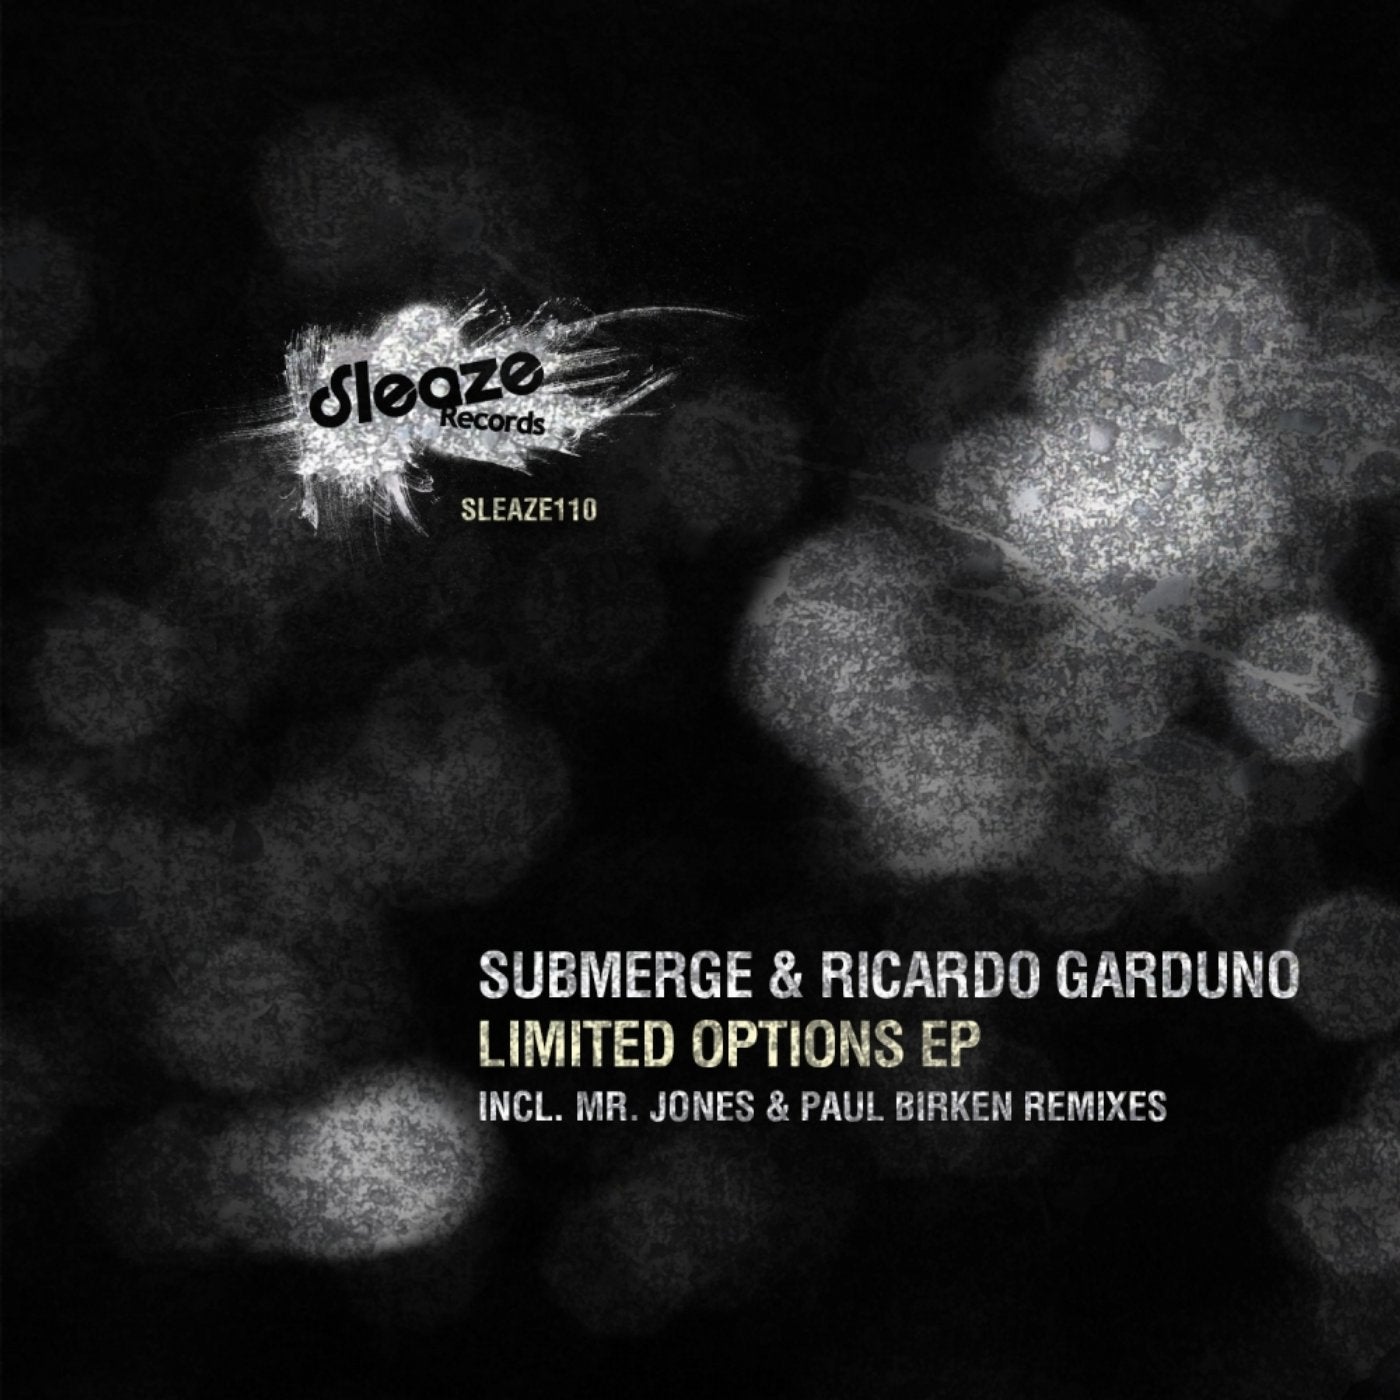 Limited Options EP